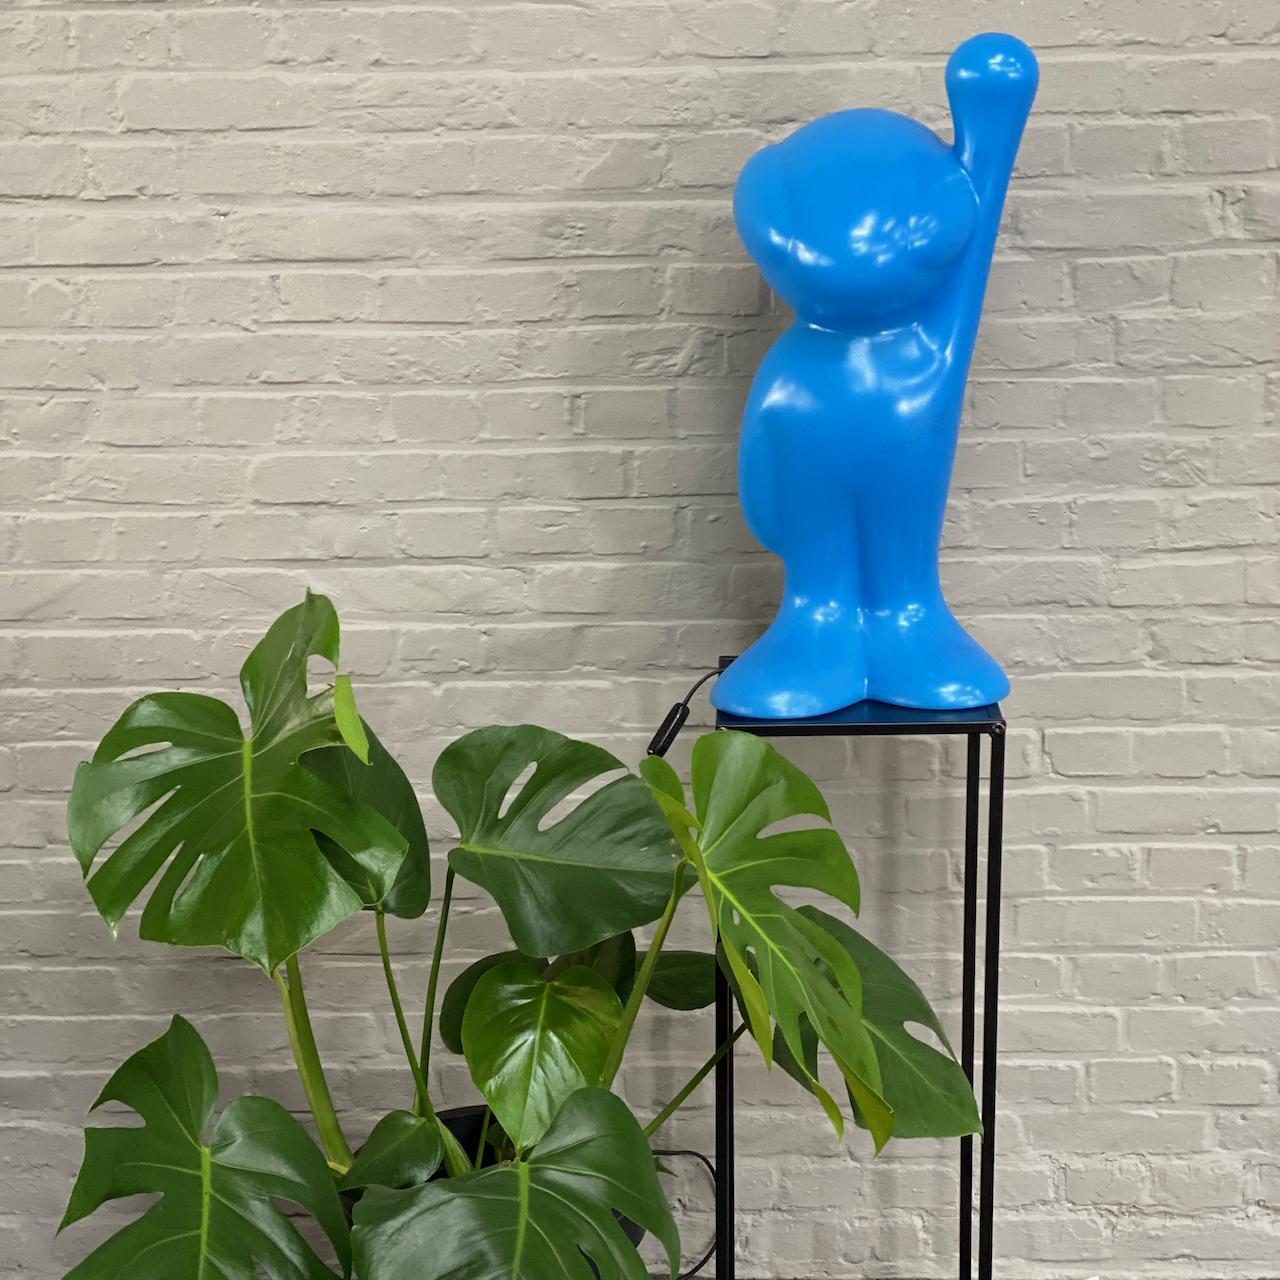 Rare Pop Art style - futuristic modern lamp. Can be used as a table or floor lamp.
Designed by the famous Italian industrialist designer Guido Venturini. 
Produced in 2001 by Alessi in Italy. 
The original label is still present on the bottom. 